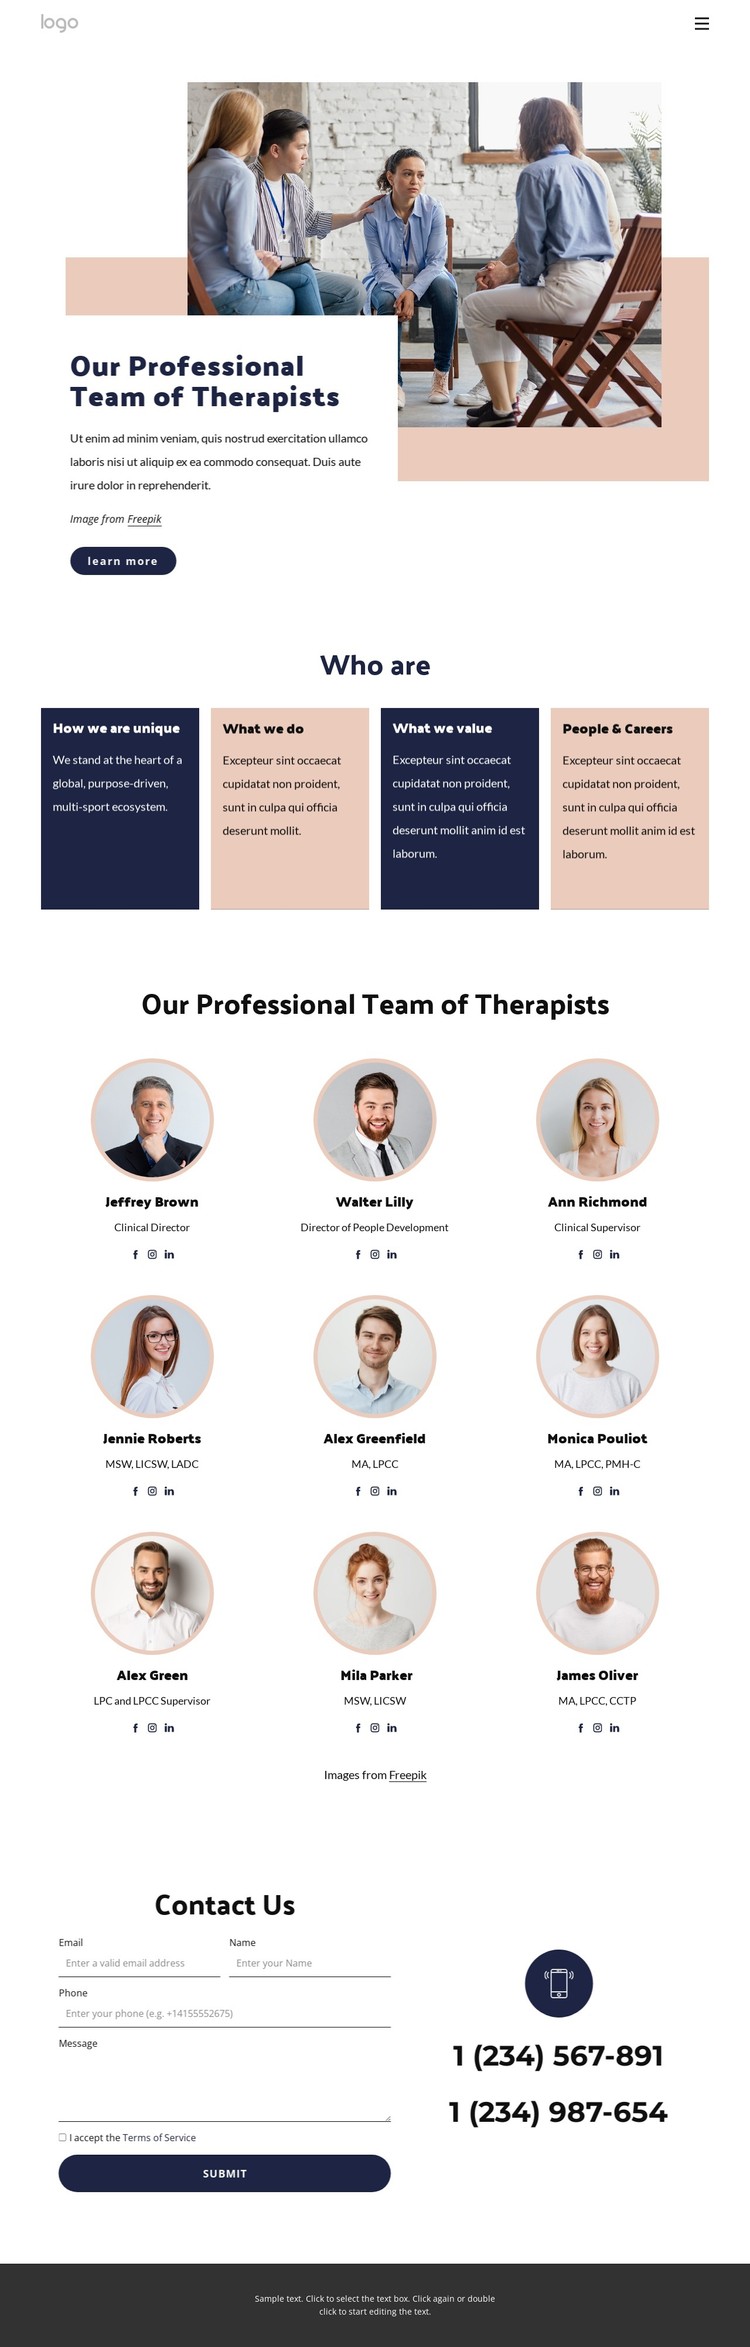 Our professional team of therapists Static Site Generator